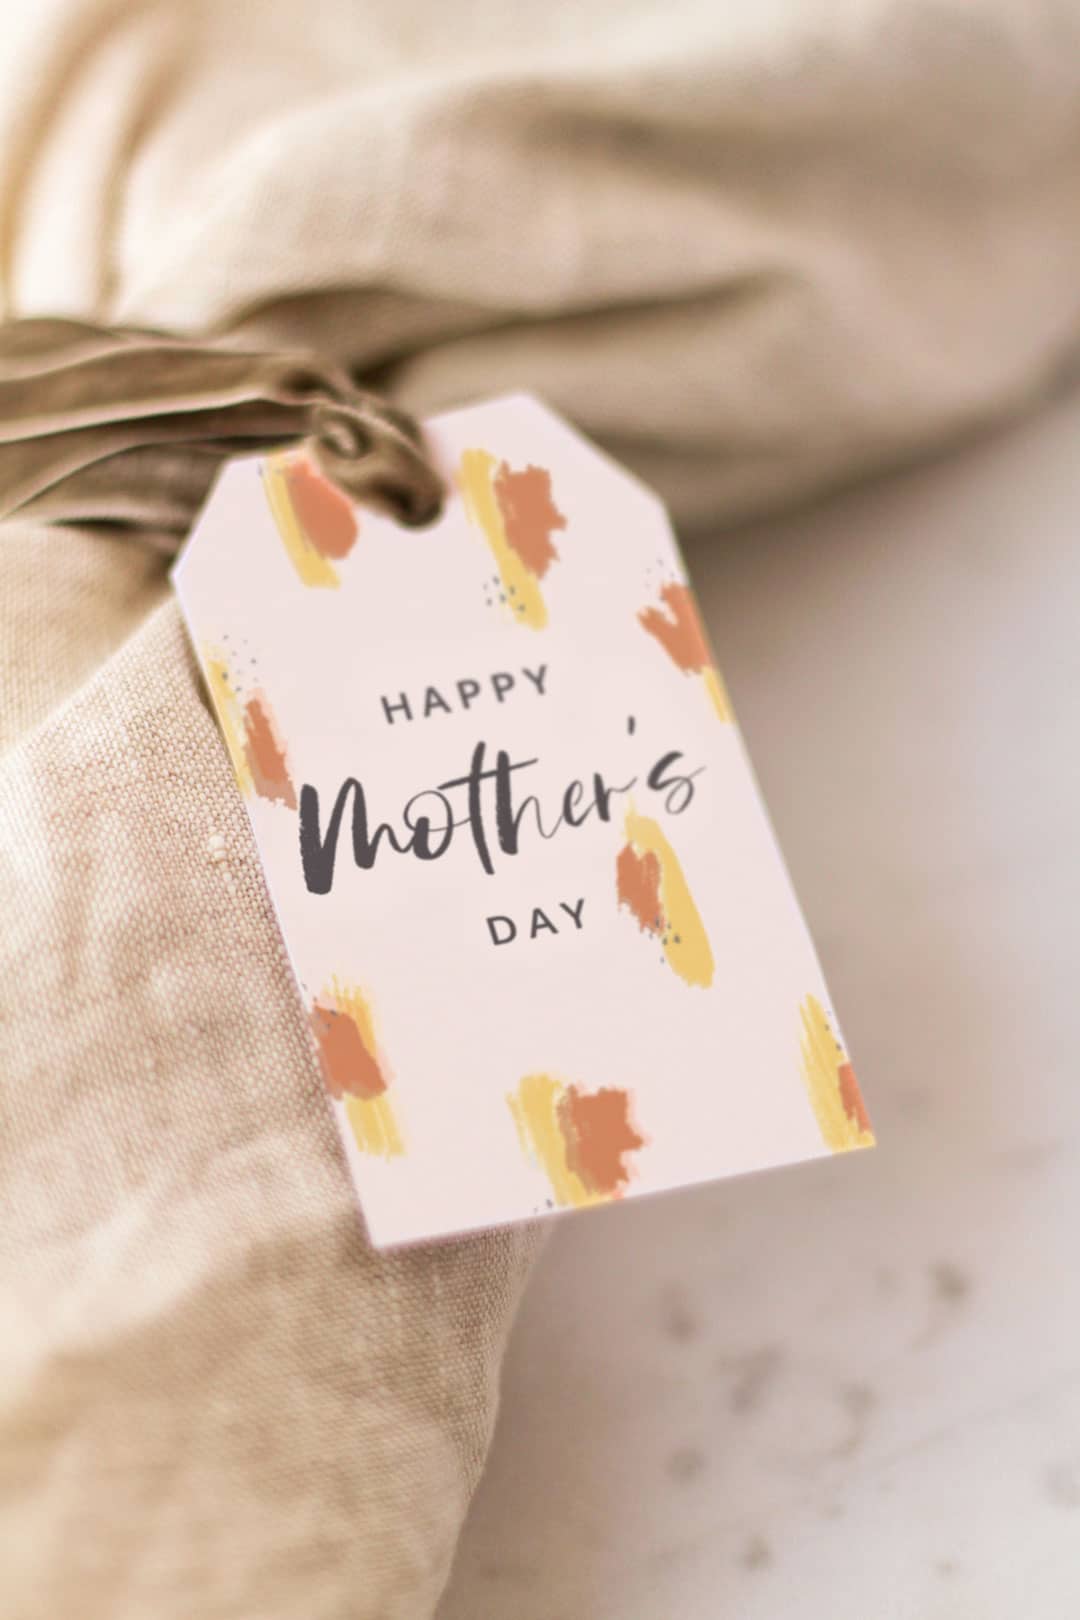 Printable Mother's Day gift tags